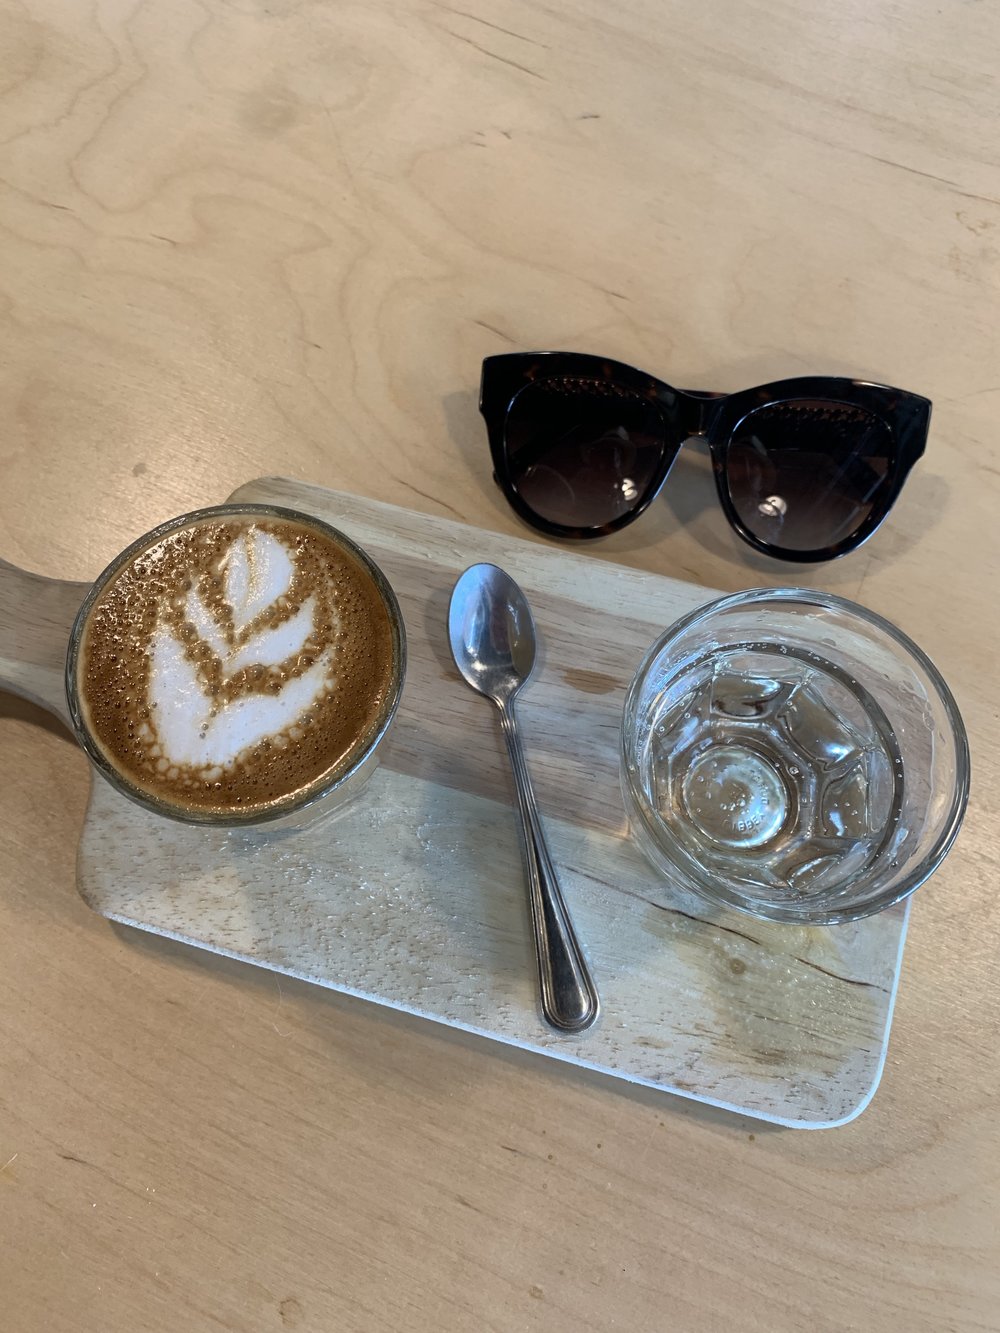 Piccolo Latte with coconut milk at the  Kookaburra Coffee Shop  in St Augustine Beach… they are serious about their coffee and serve with sparkling water to cleanse the palate!